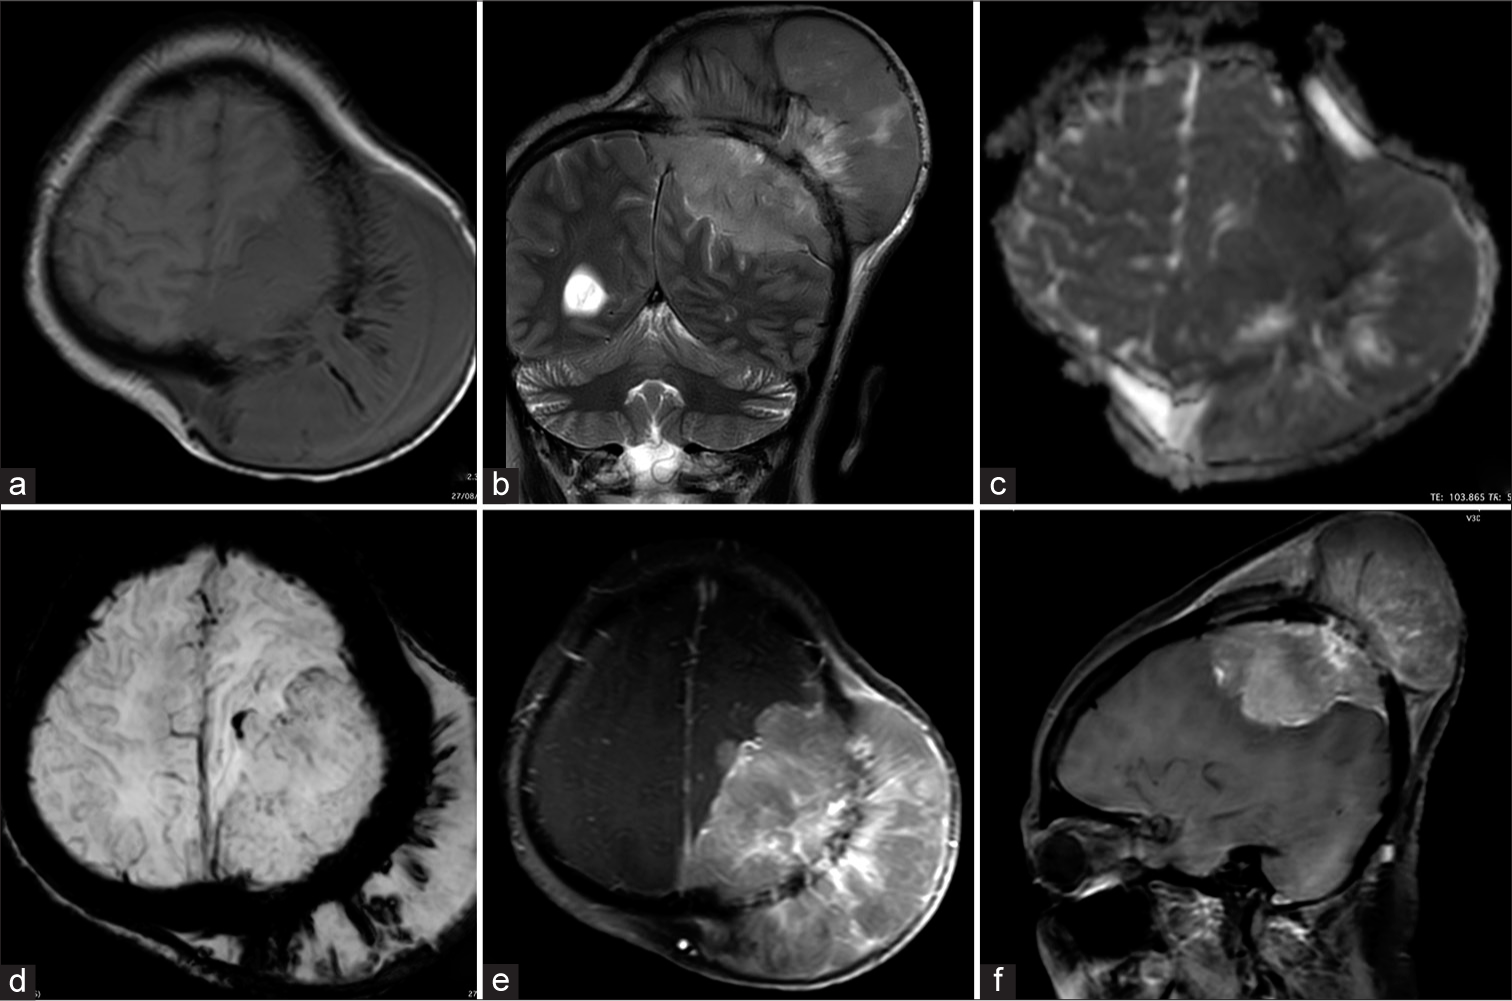 Magnetic resonance imaging (MRI) shows an area of marrow signal alteration in the left parietal bone with a large extraosseous soft-tissue mass having an extradural component. The patient had presented with the large scalp component of the mass. (a) The mass is isointense on T1WI, (b) hyperintense on T2WI and (c) shows diffusion restriction. Extensive spiculated sunburst type of periosteal reaction with new bone formation is seen along the extracranial aspect of the lesion. (d) Susceptibility weighted imaging (SWI) images shows the periosteal reaction very well. (e, f) On post contrast intense heterogeneous enhancement of the lesion is seen.